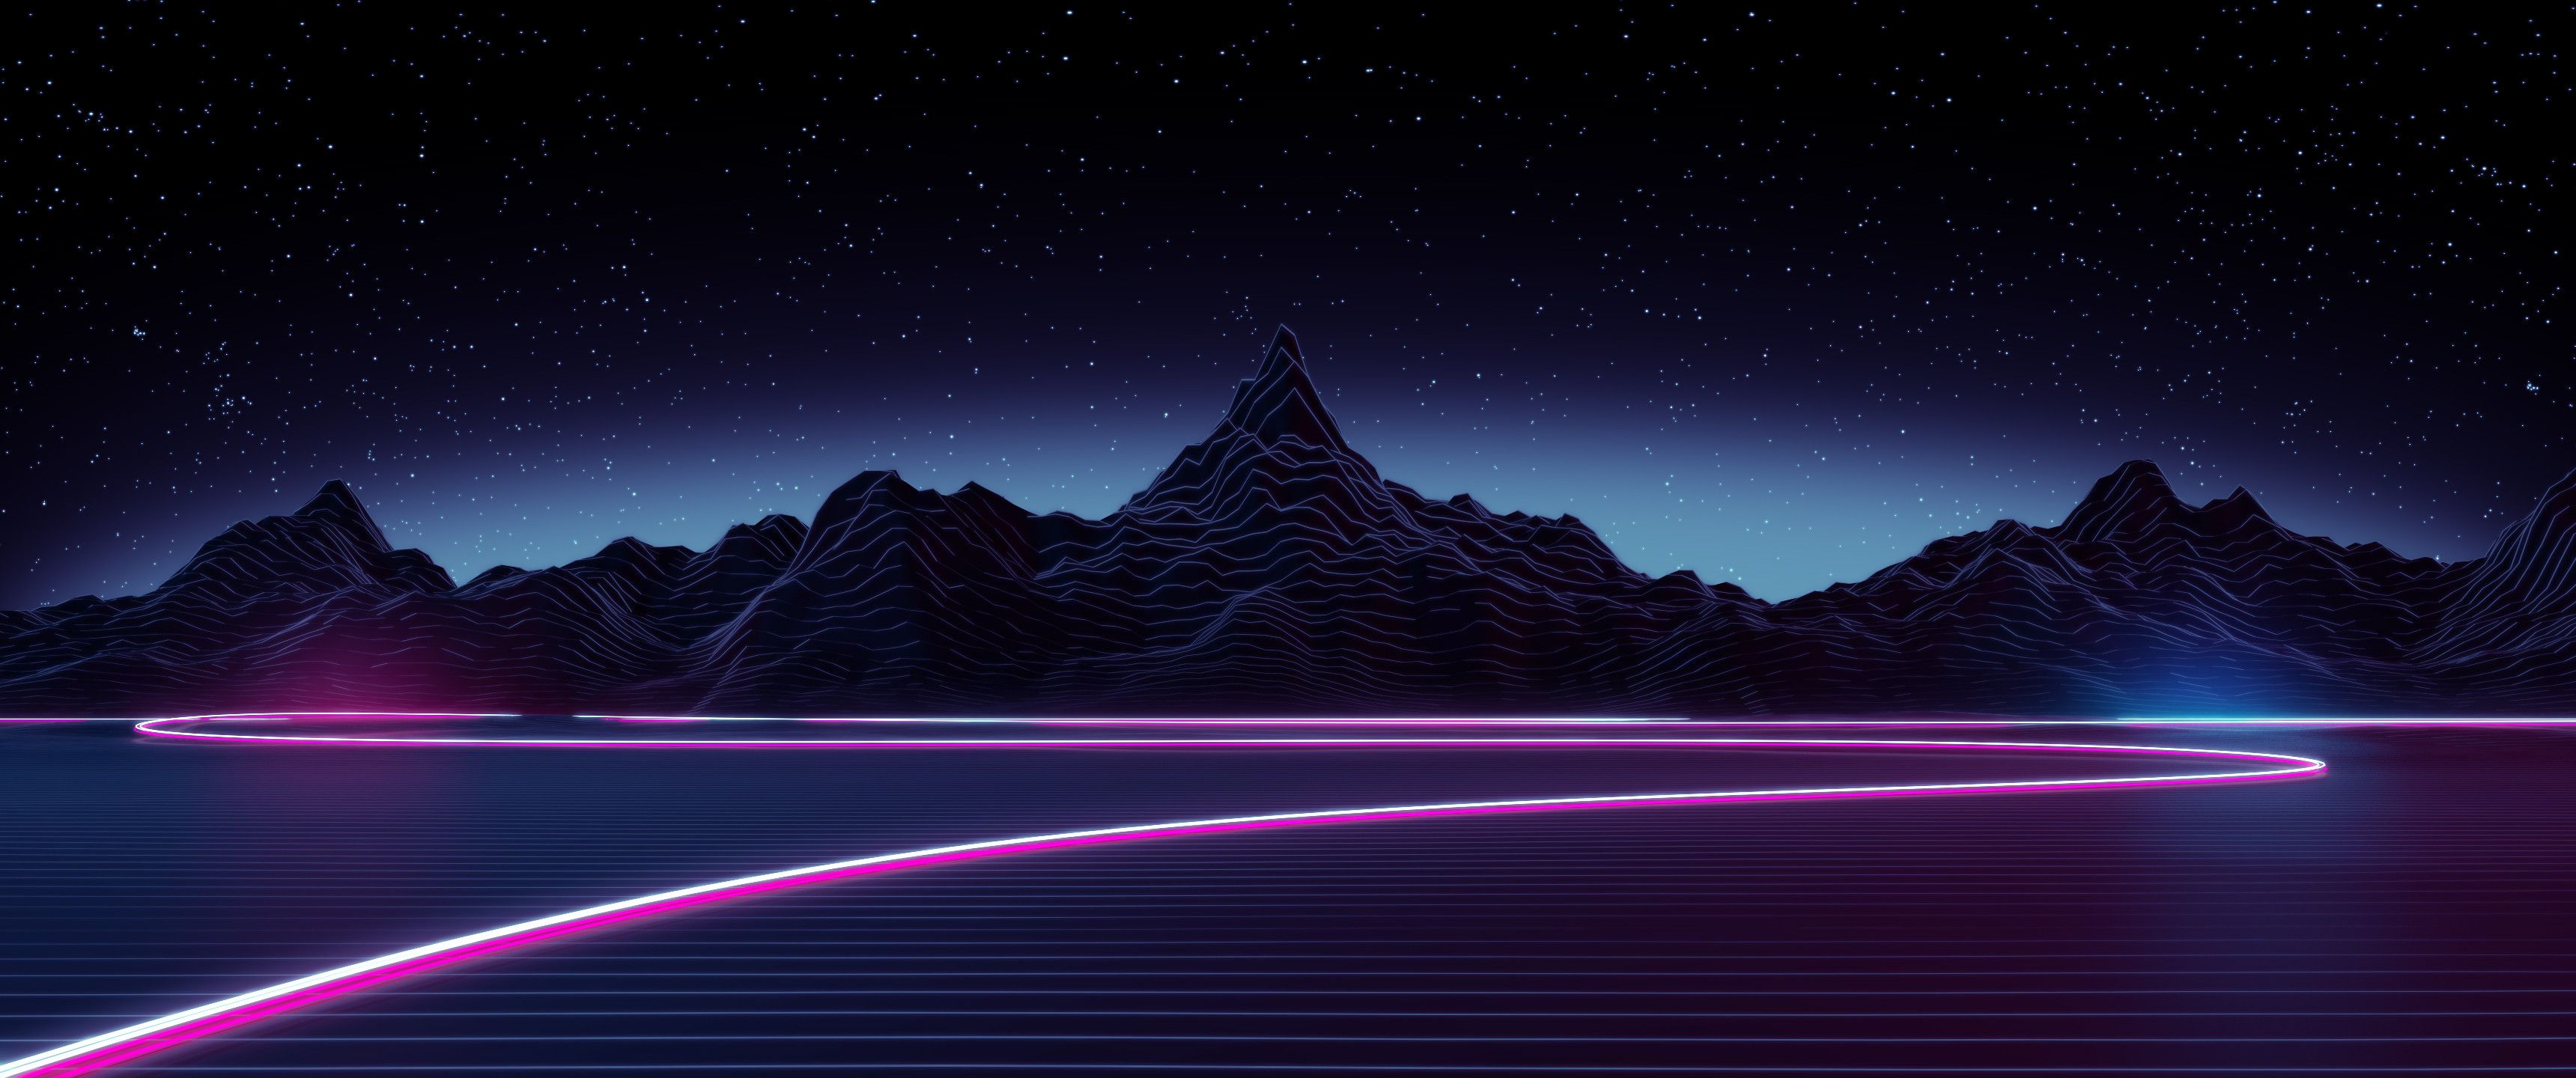 Neon lights on the water with mountains in the background - Navy blue, mountain, scenery, dark blue, landscape, dark vaporwave, lo fi, synthwave, low poly